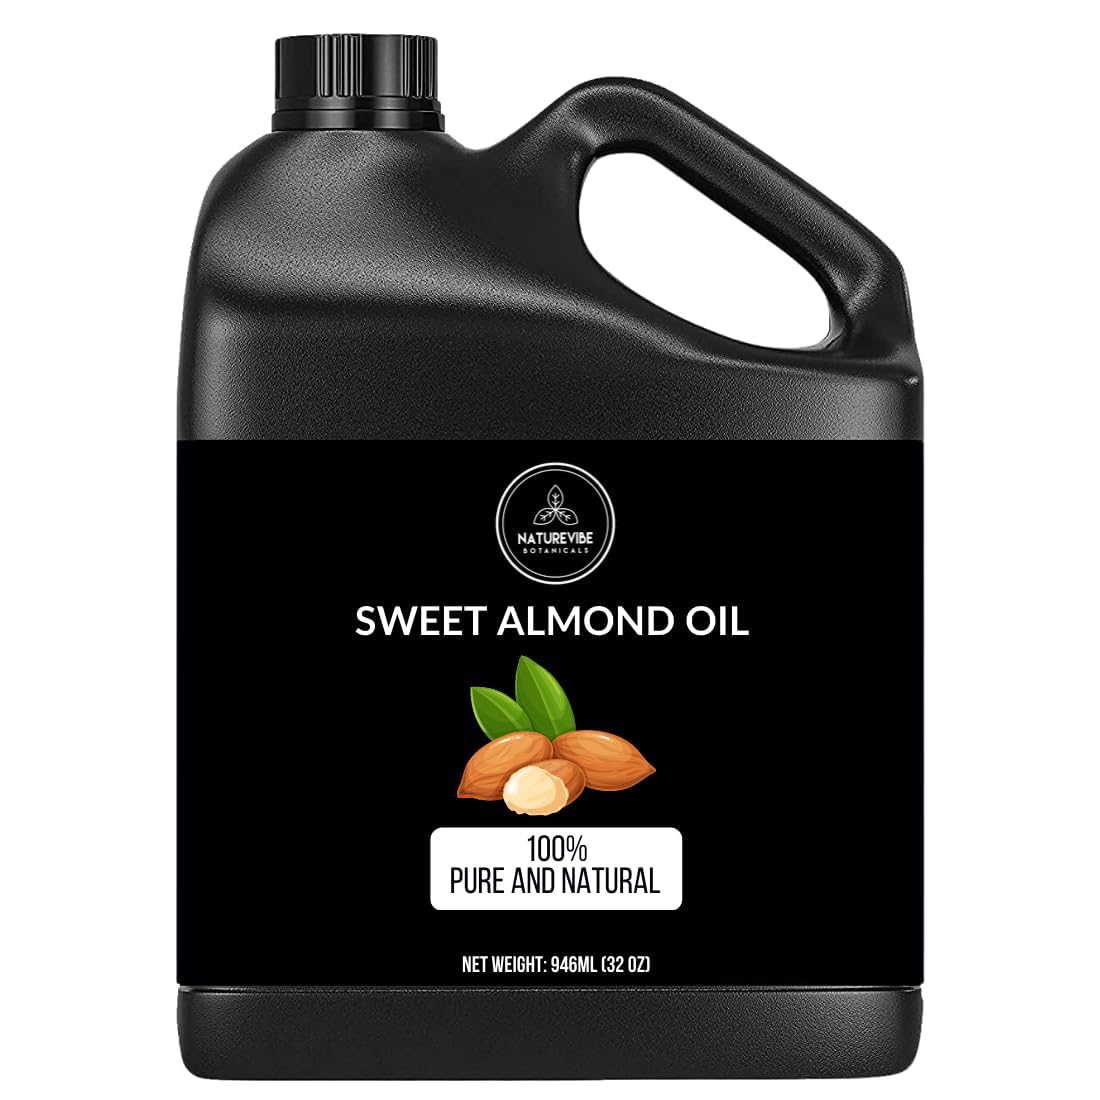 Sweet Almond Oil 32 Ounces by Naturevibe Botanicals | 100% Pure and Natural | Great for Skin and Hair | Body Oil | Cold-Pressed Almond Oil (946 ml)